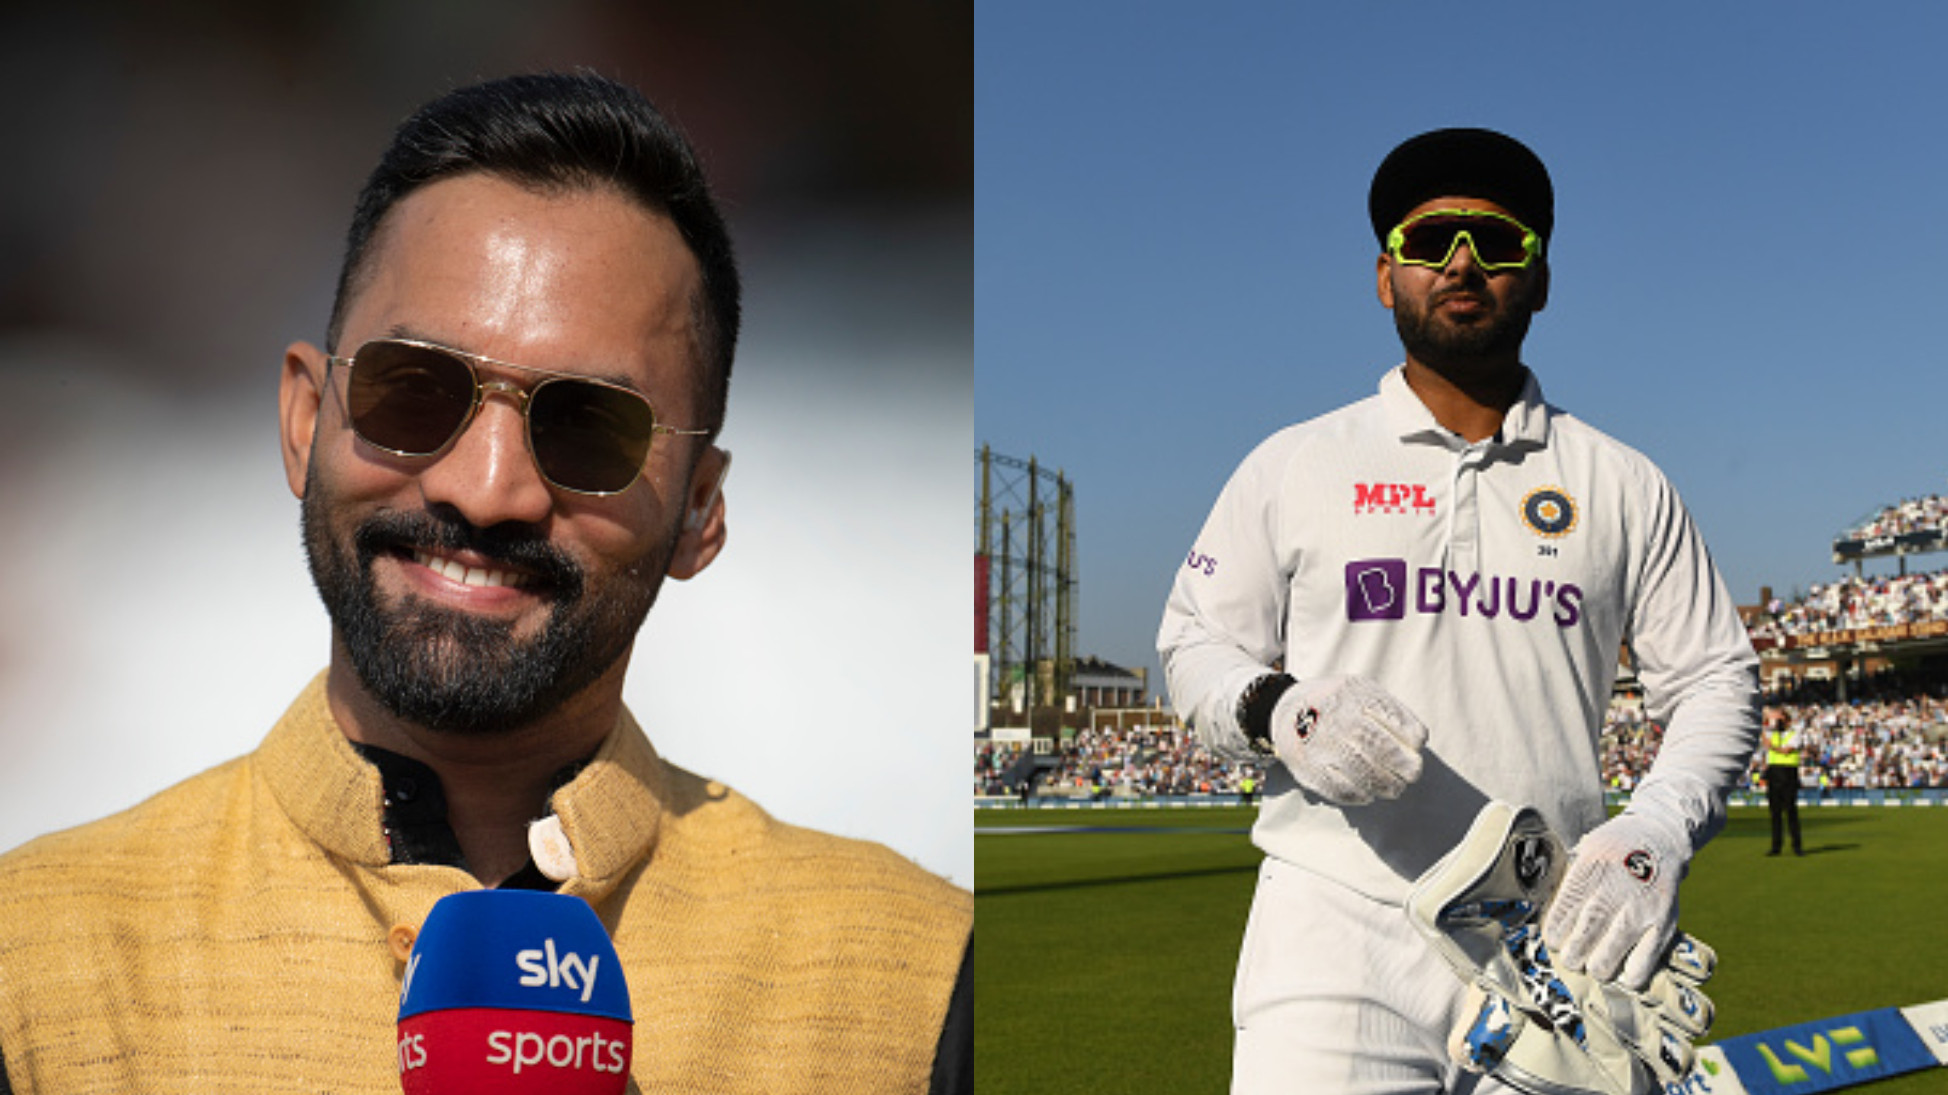 IND v SL 2022: “Hallmark of this Test for him personally”: Karthik praises Pant for his wicketkeeping